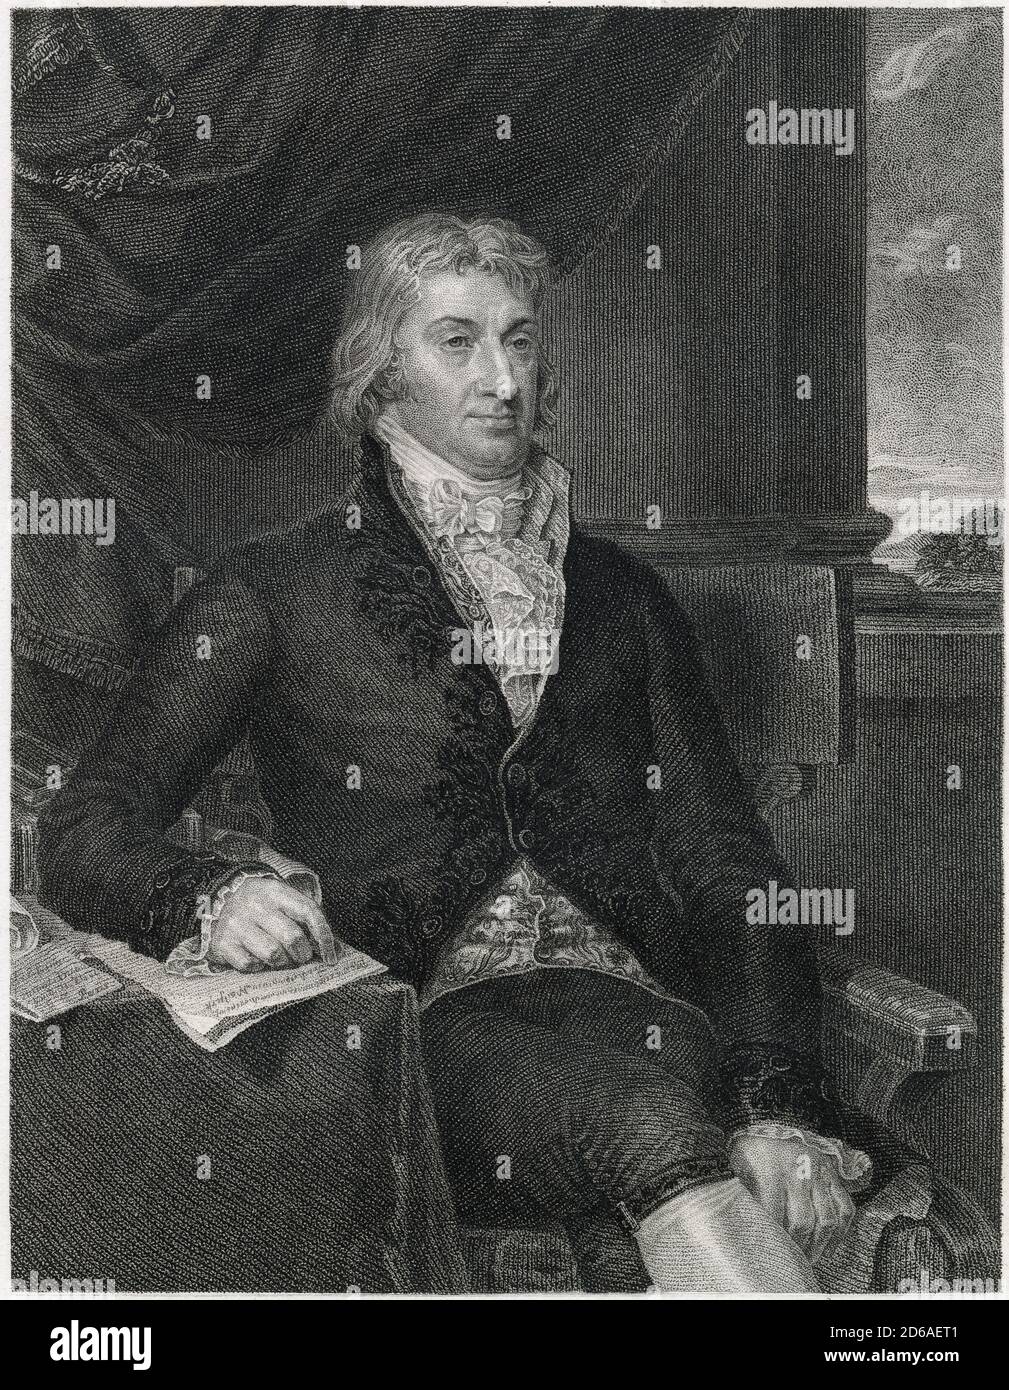 Antique c1870 engraving, Robert R. Livingston. Robert R. Livingston (1746-1813) was an American lawyer, politician, diplomat from New York, and a Founding Father of the United States. SOURCE: ORIGINAL ENGRAVING Stock Photo